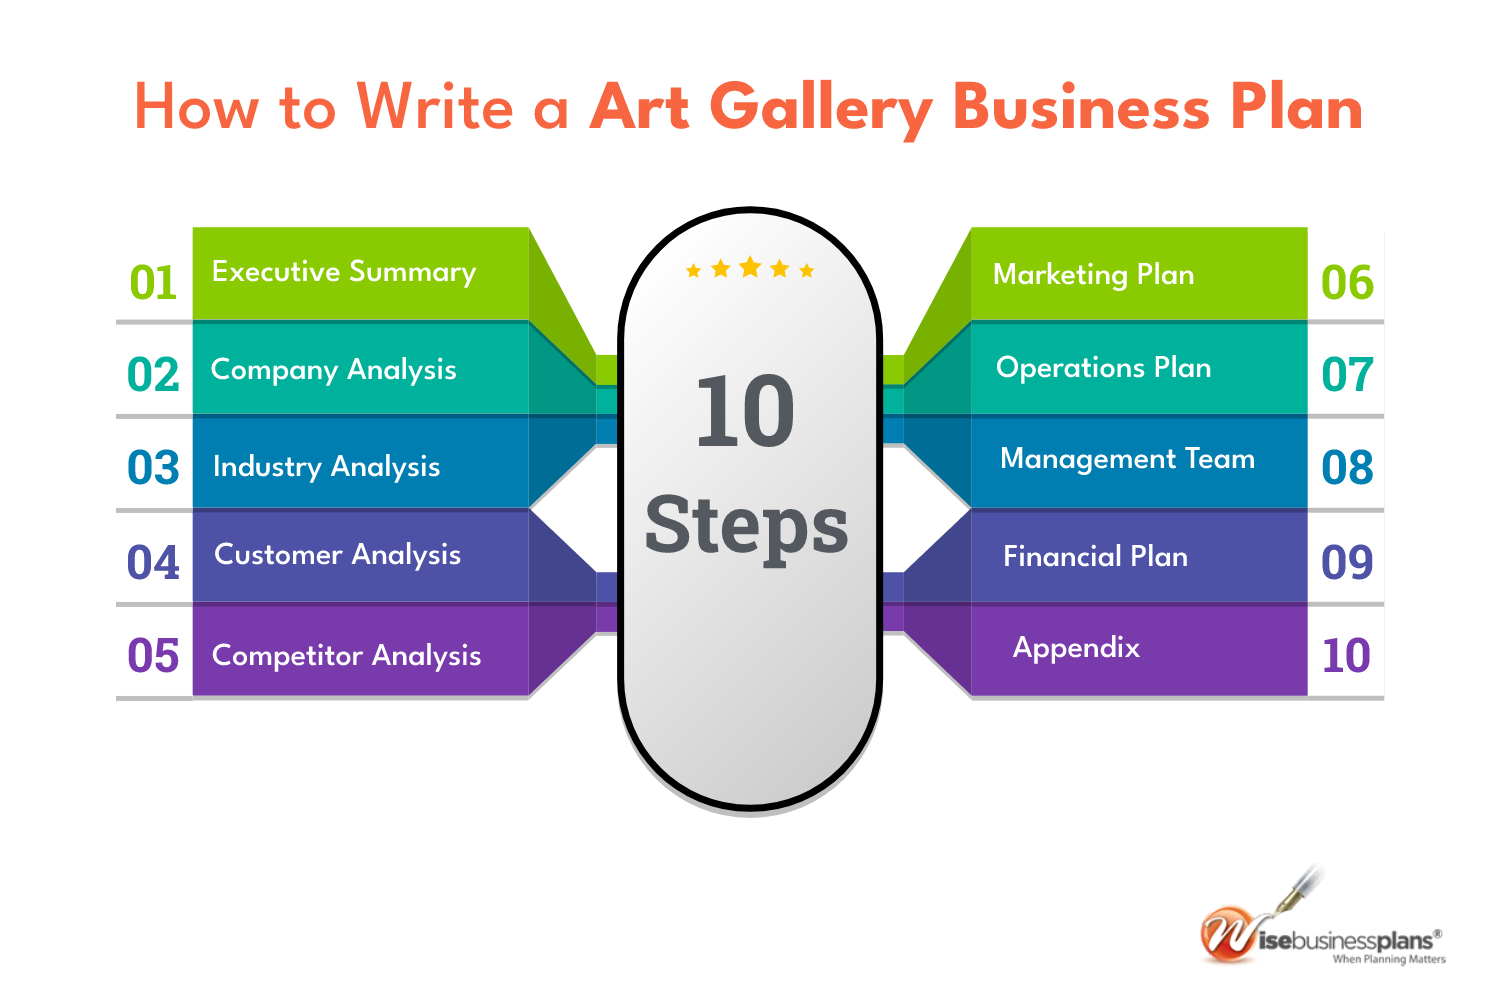 How to write a art gallery business plan